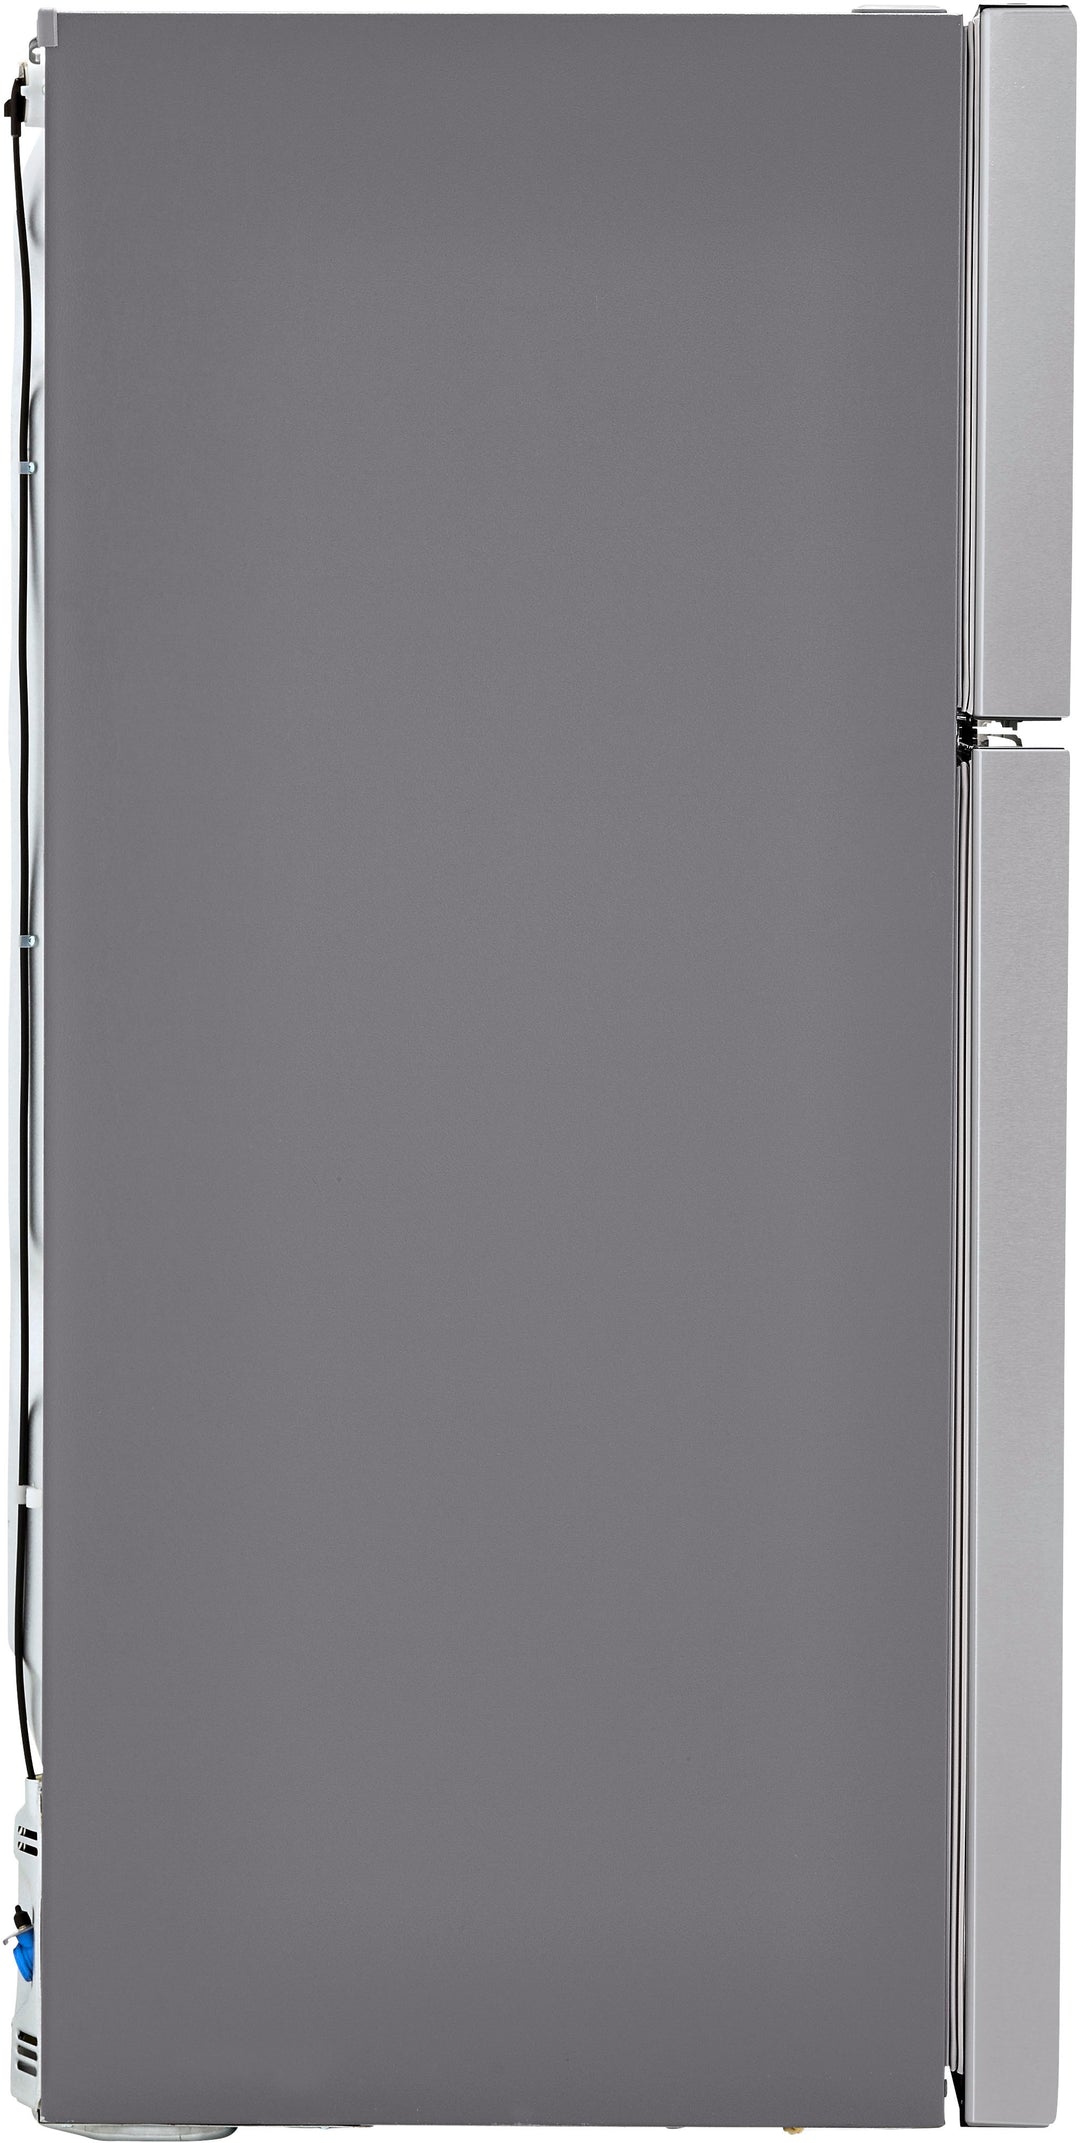 LG - 23.8 Cu Ft Top Mount Refrigerator with Internal Water Dispenser - Stainless steel_2